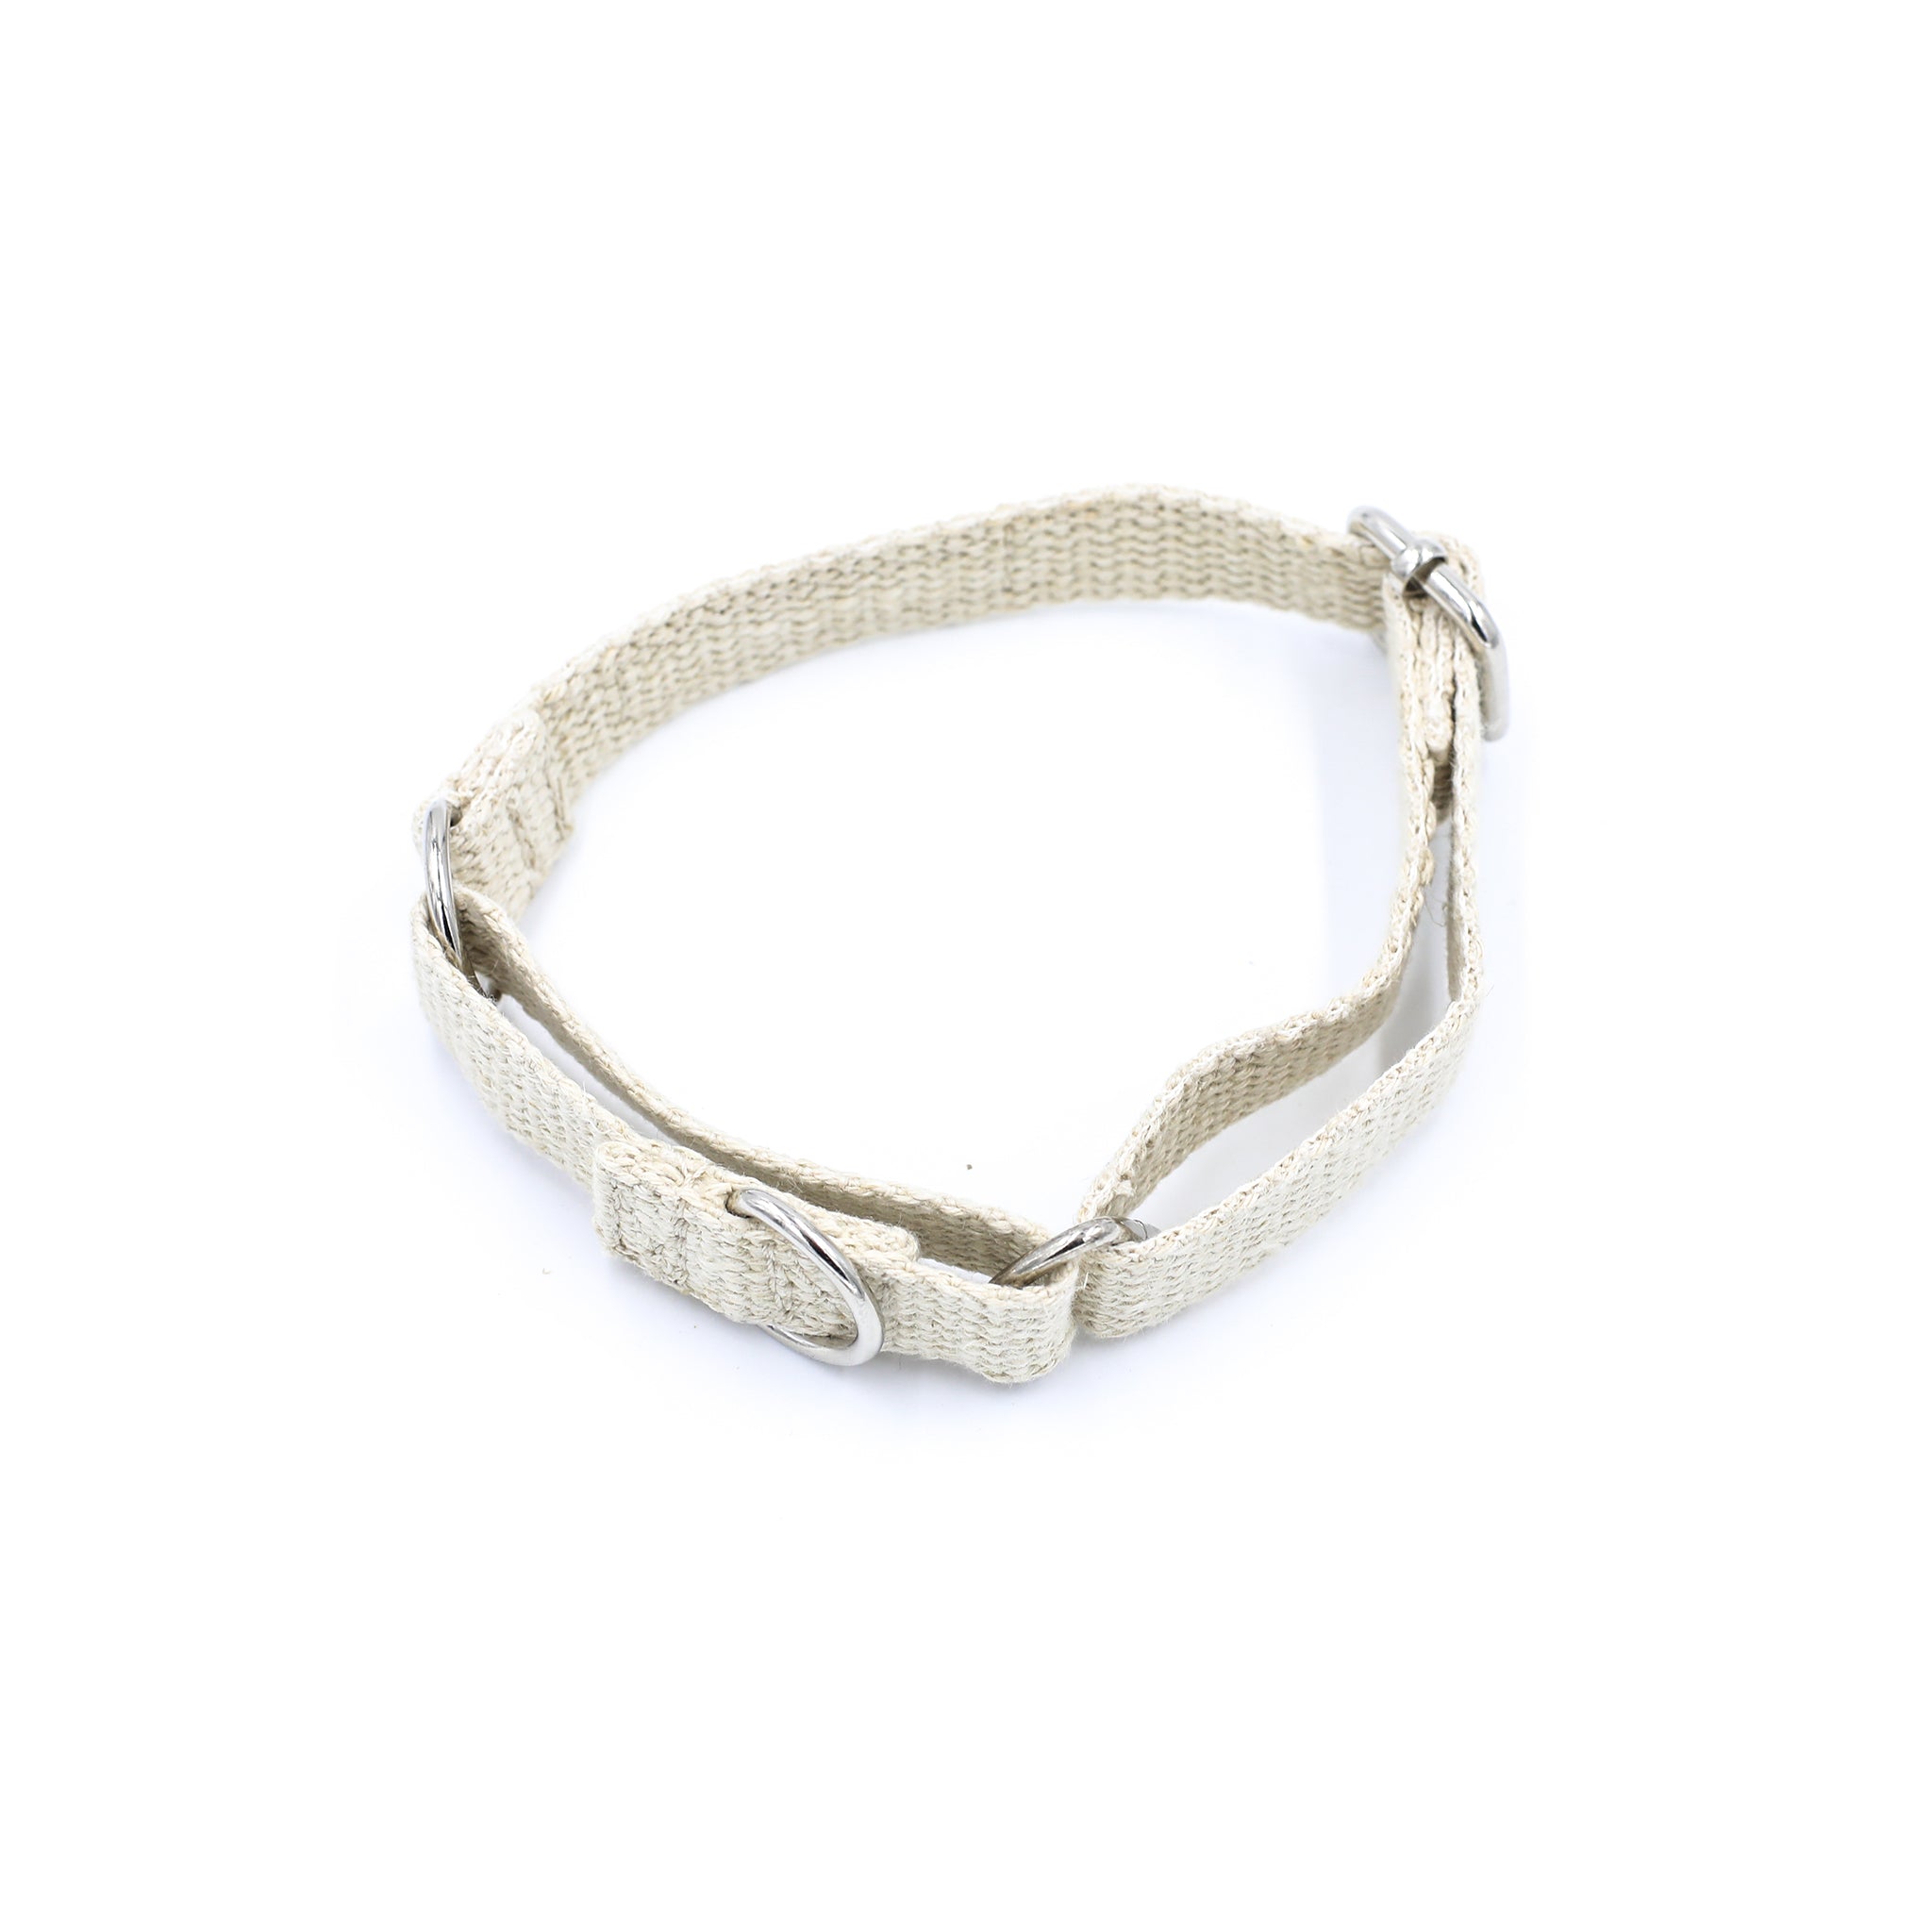 An eco-friendly natural, plastic free, martingale dog collar. Placed on a white background. The collar has two silver buckles and a stitched white cotton logo